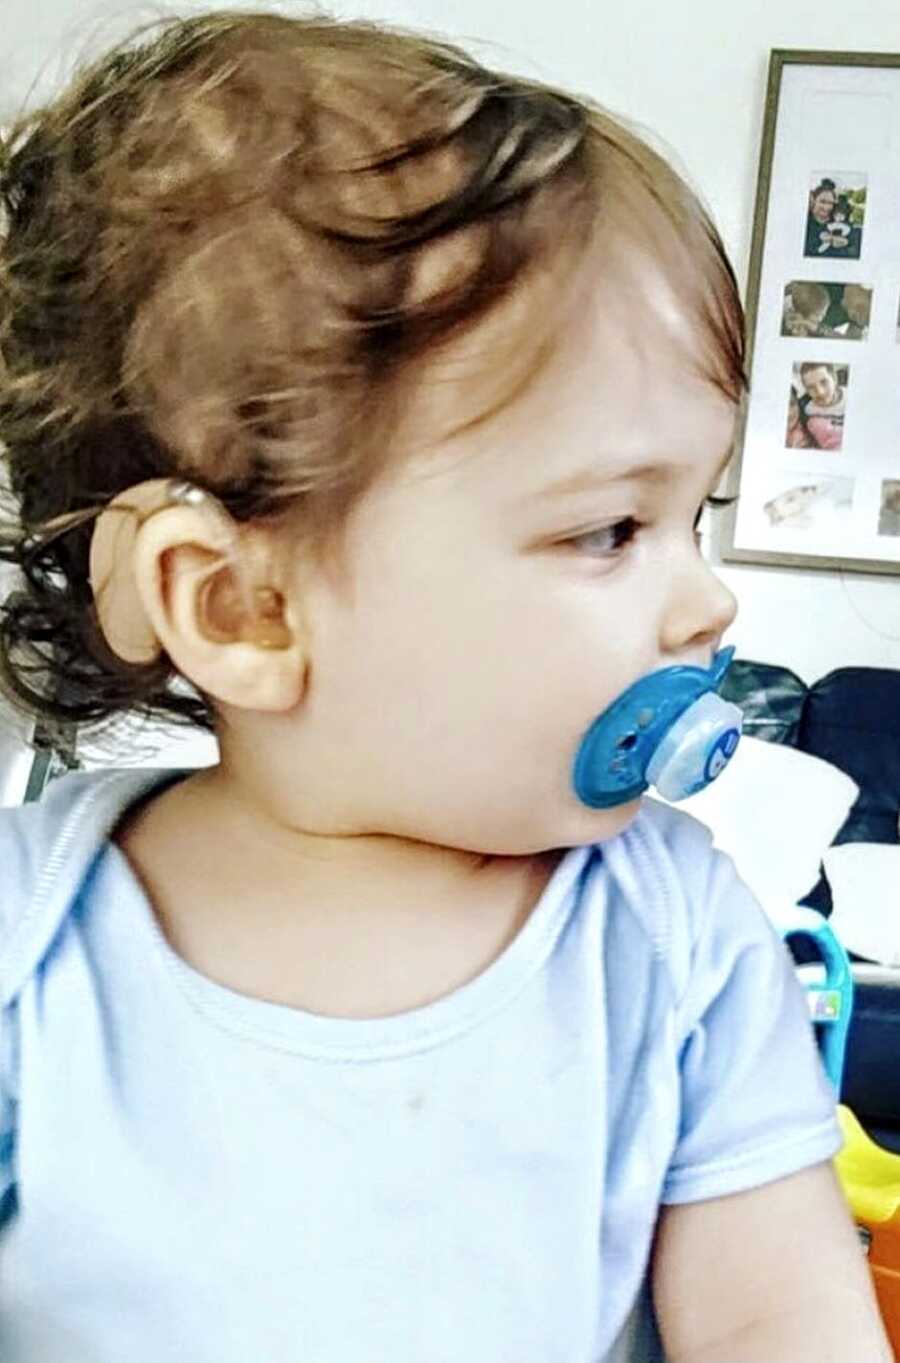 Toddler with cochlear implants sucks on a blue pacifier in a blue onesie